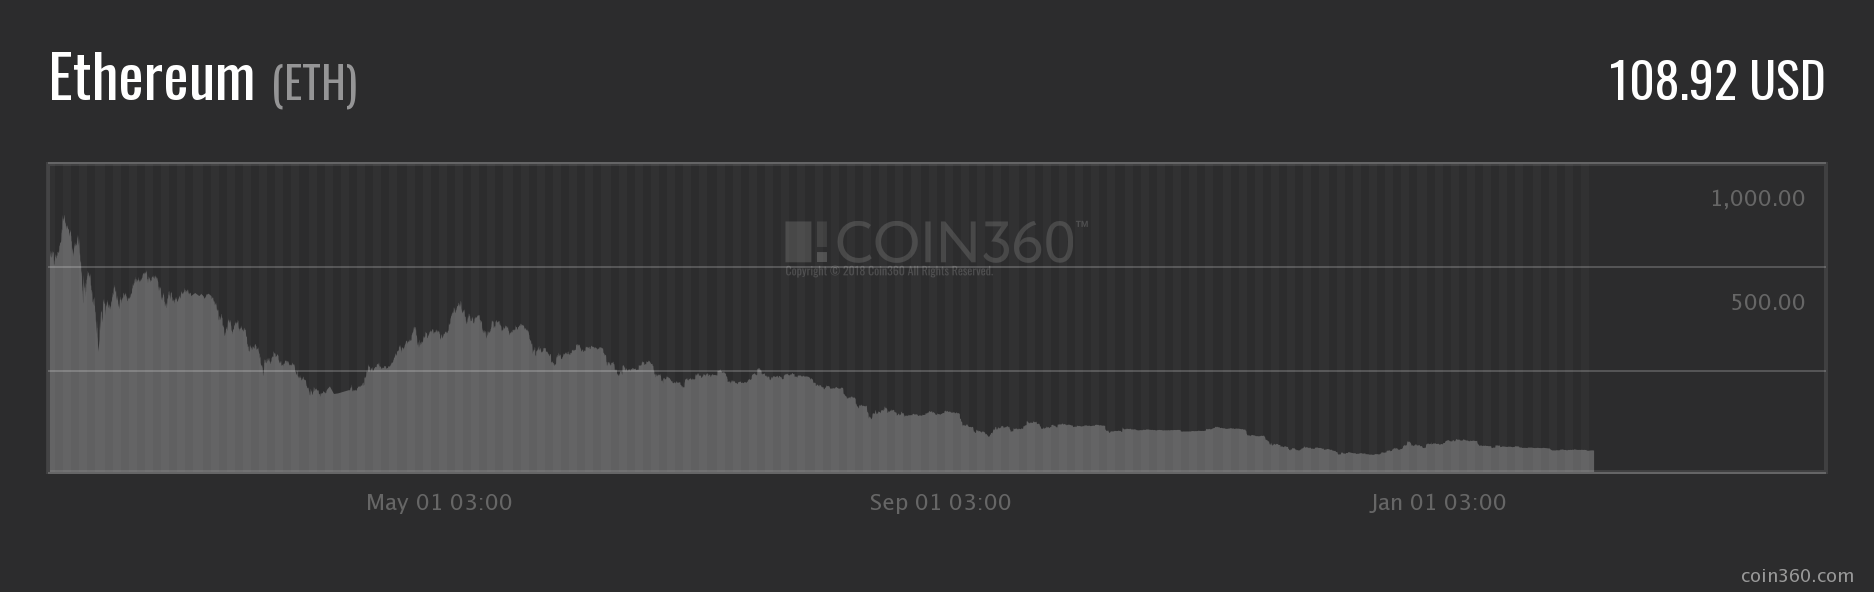 comparison-with-eth-price-fluctuations.png